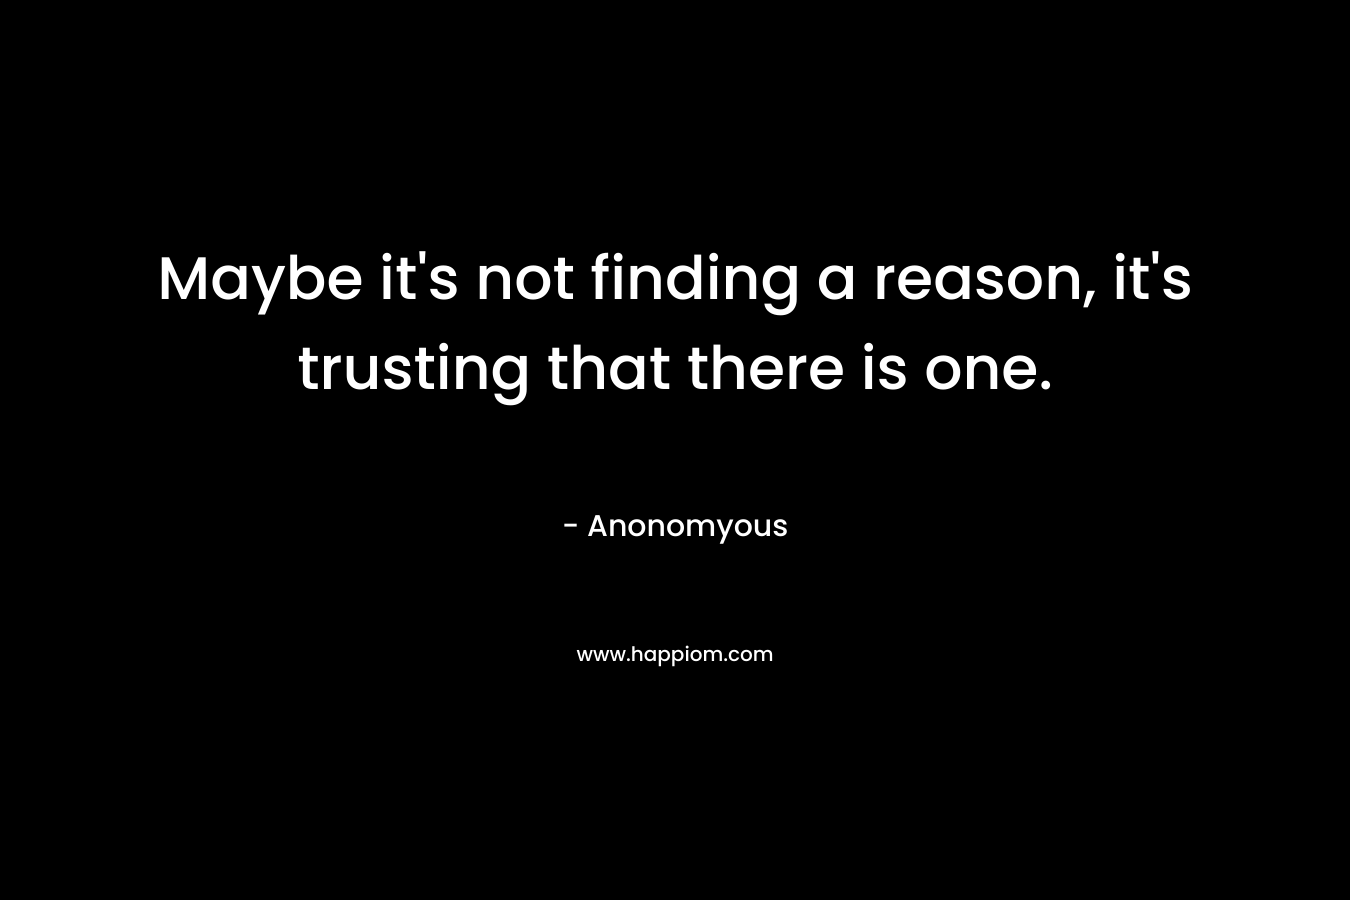 Maybe it’s not finding a reason, it’s trusting that there is one. – Anonomyous